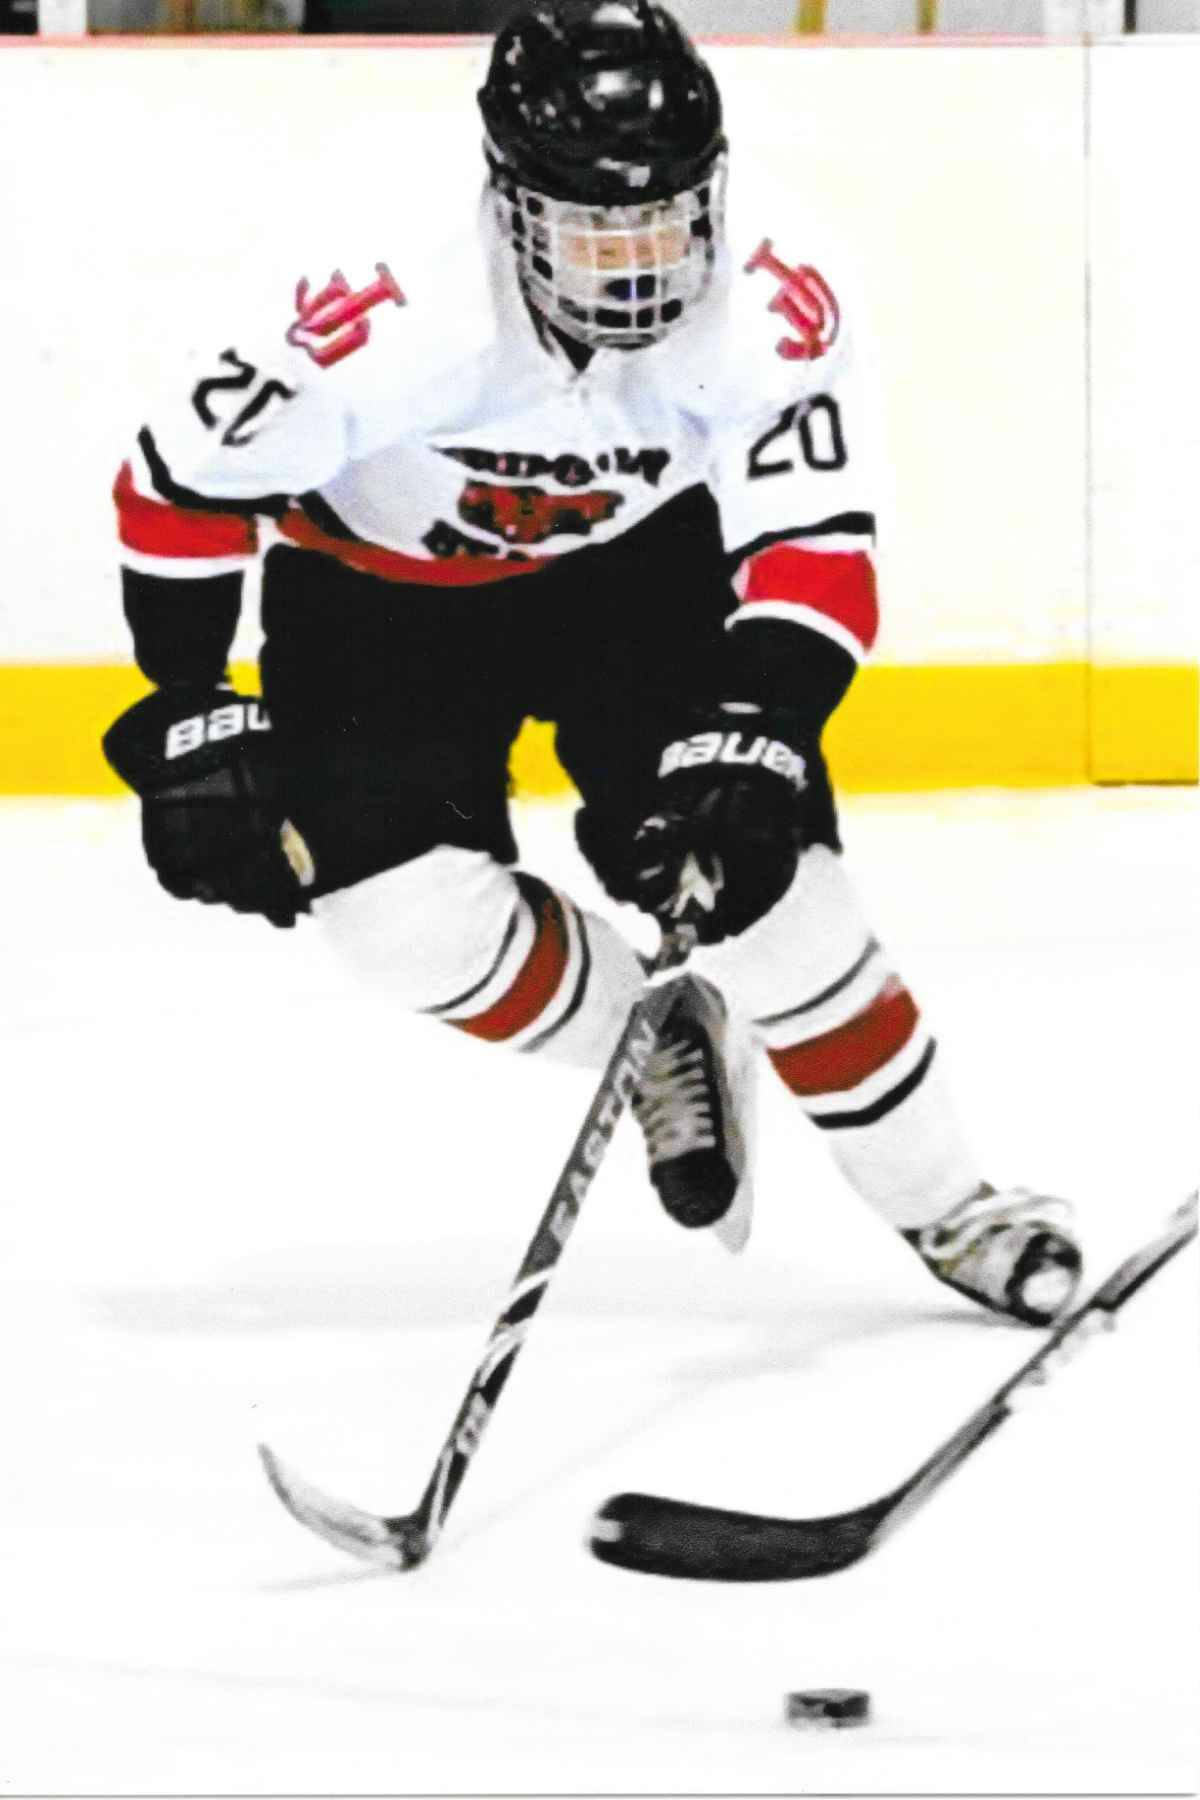 This photo shared by the Campbell family shows Matthew Campbell, who wore No. 20 when playing for the Crimson Bears. It’s the same number now worn by younger brother, Brandon Campbell. Matthew died in 2020, and the Campbell family continues his legacy with an annual award recognizing two local hockey players for their kindness and sportsmanship. (Courtesy Photo)